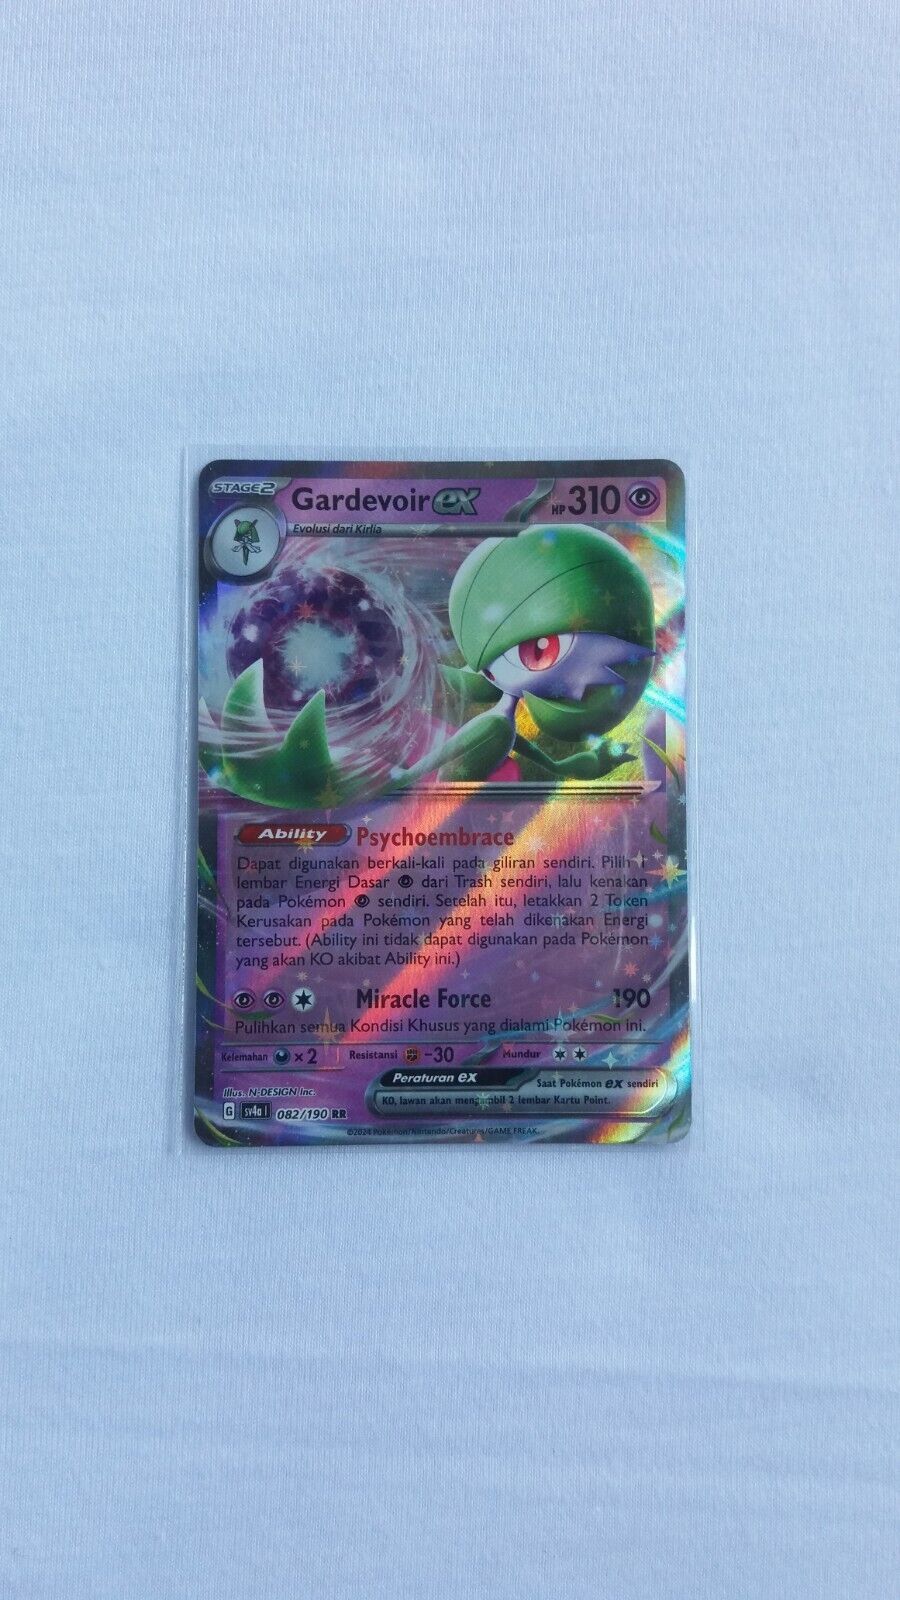 Primary image for GARDEVOIR Ex 082/190 RR Pokemon TCG Indonesia NM (Free shiping)